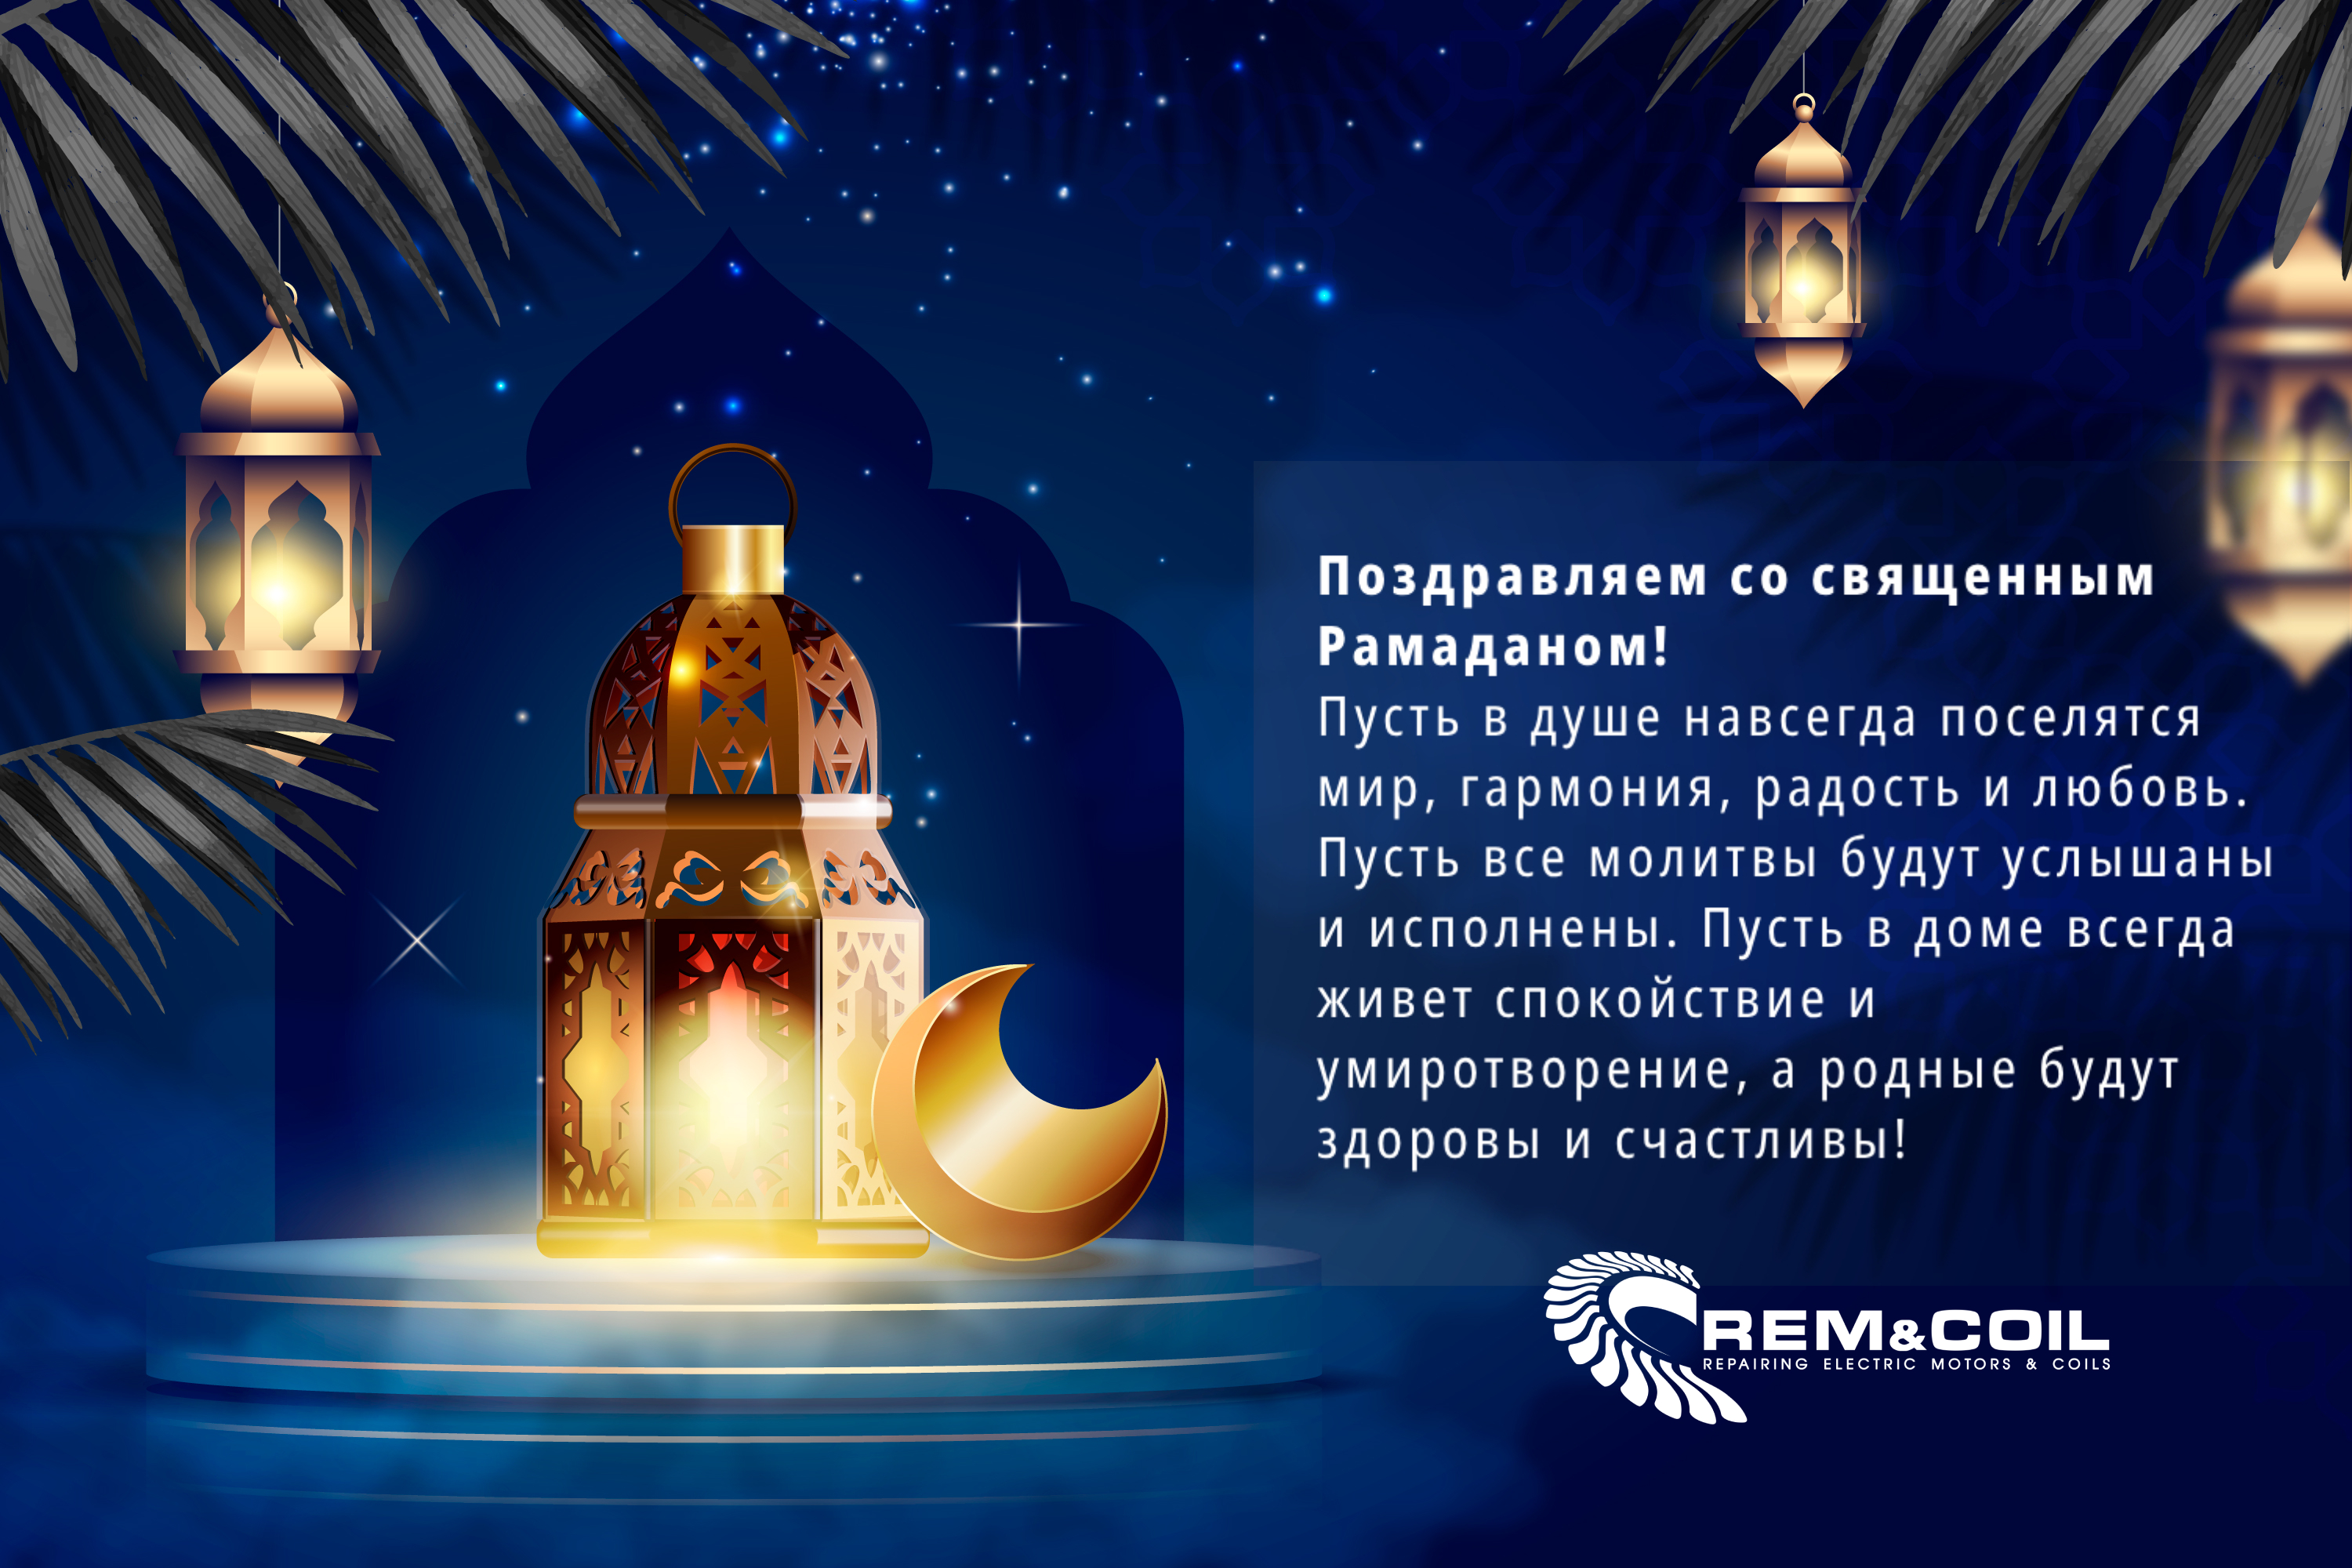 Ramadan Mubarak to you and your loved ones!